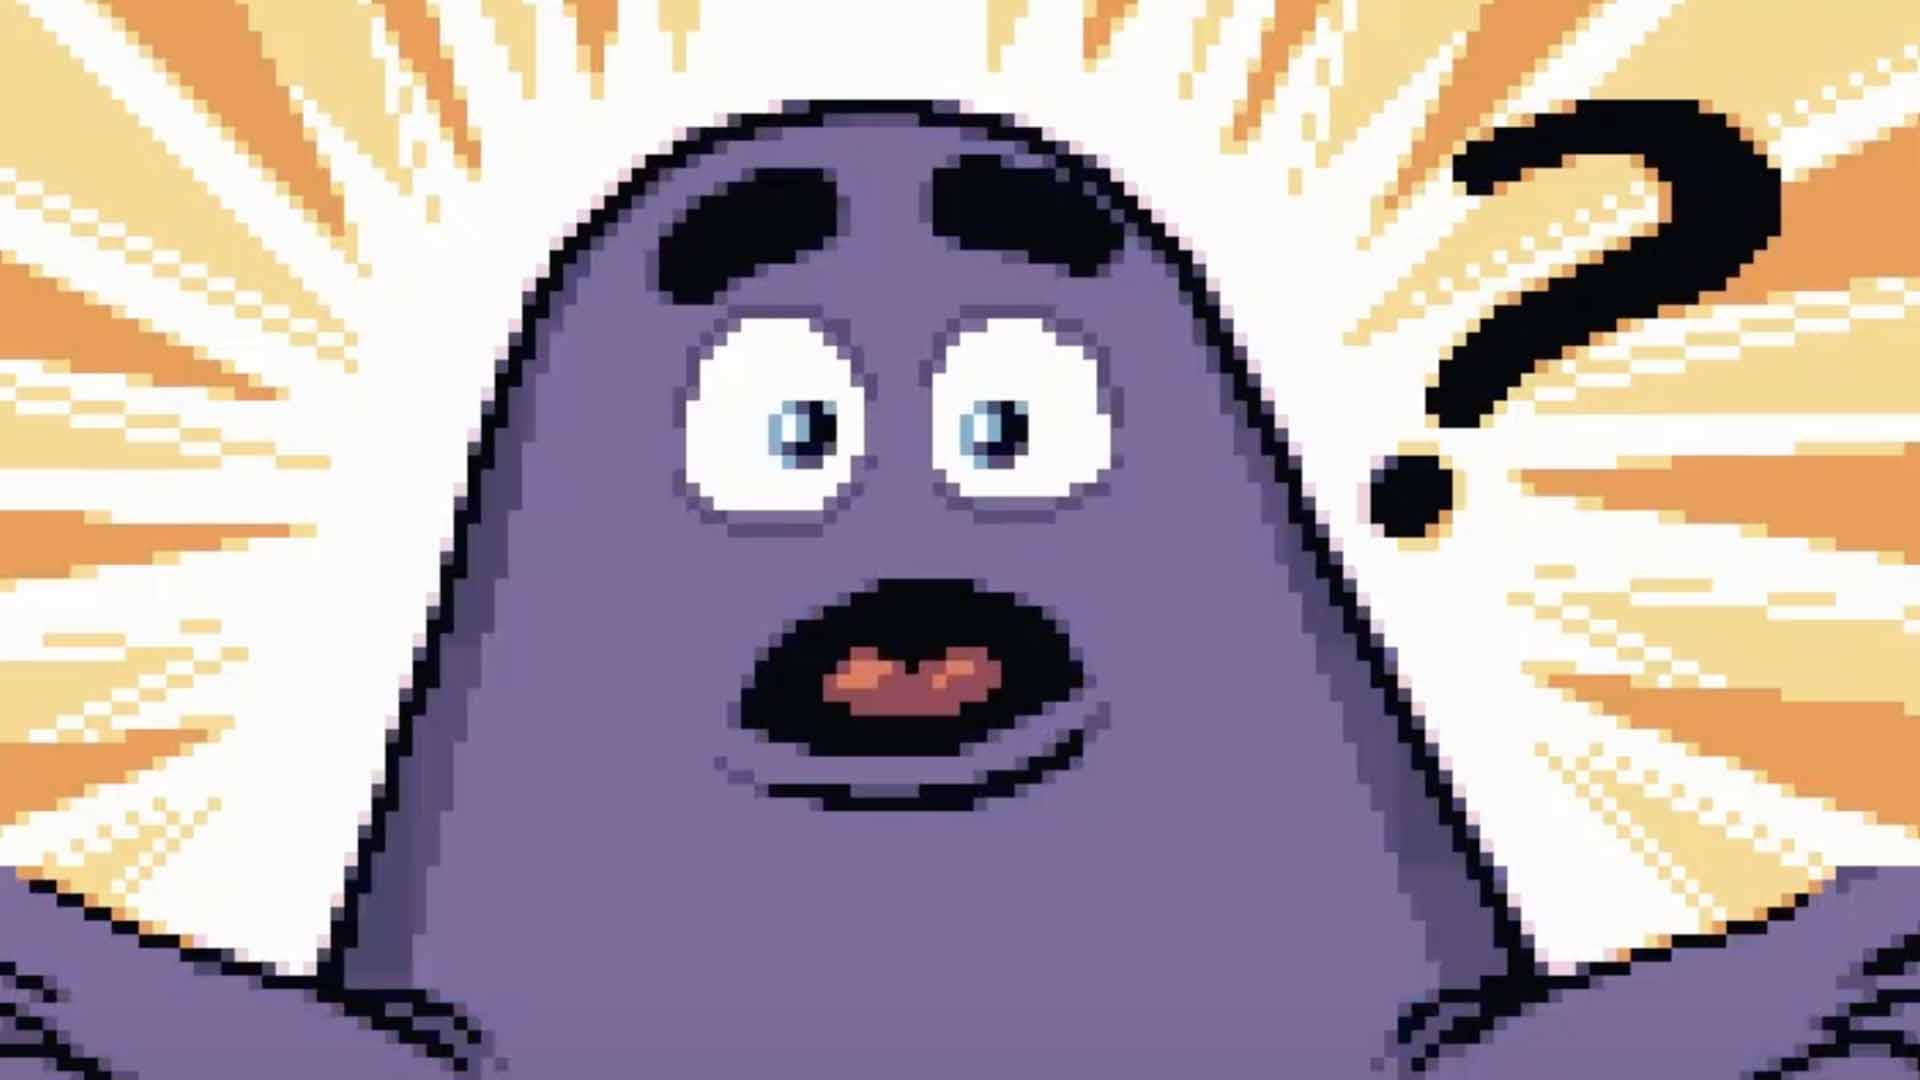 McDonald's just released a new Grimace game for the Game Boy Color